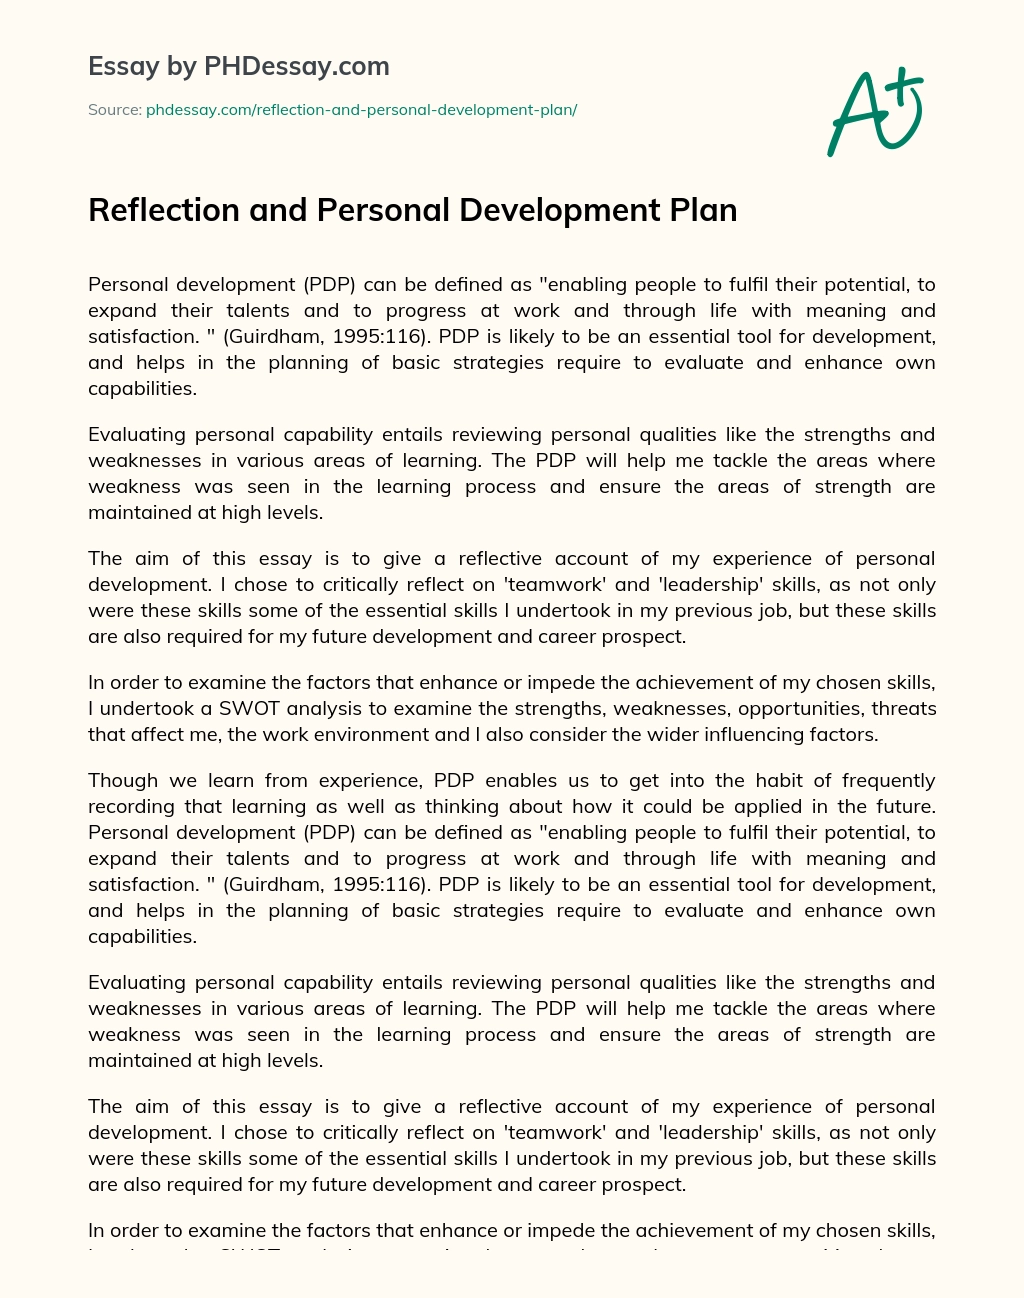 Reflection and Personal Development Plan essay